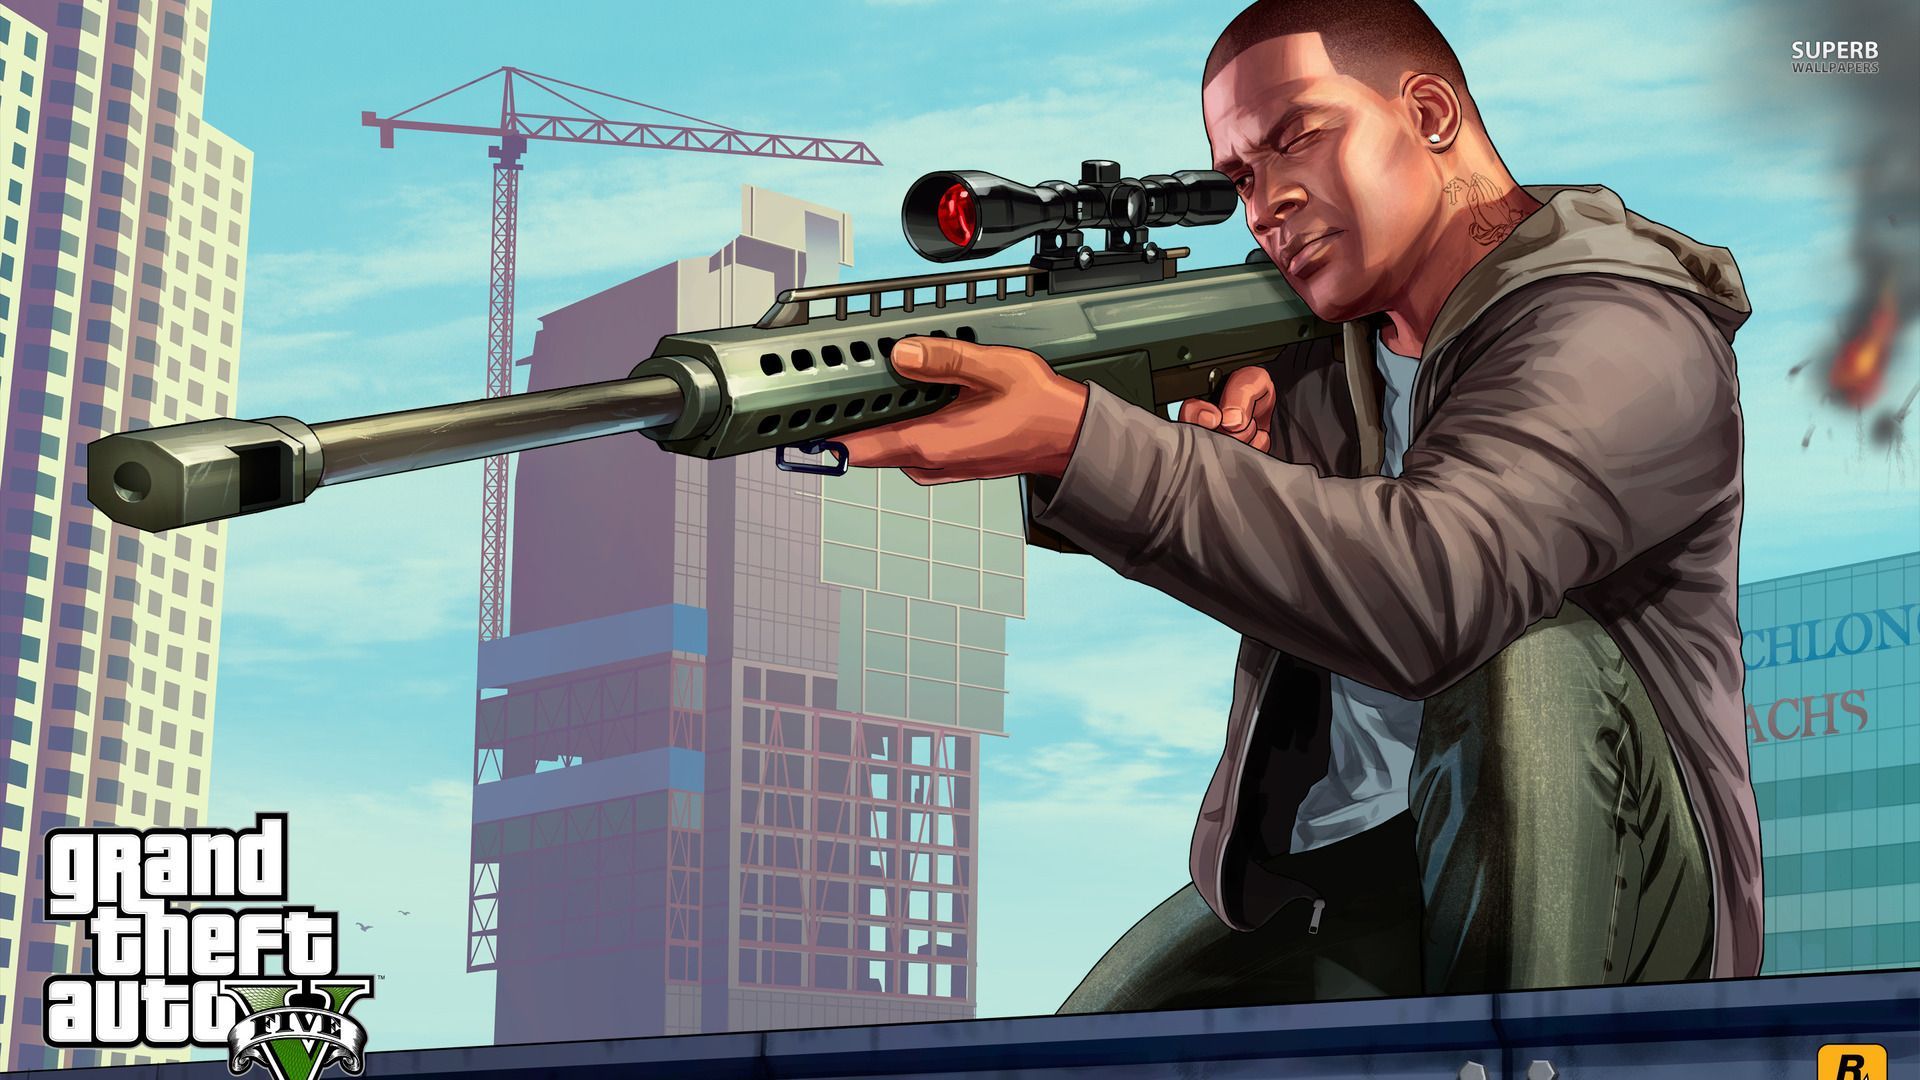 Franklin - Grand Theft Auto V wallpaper - Game wallpapers - #25661